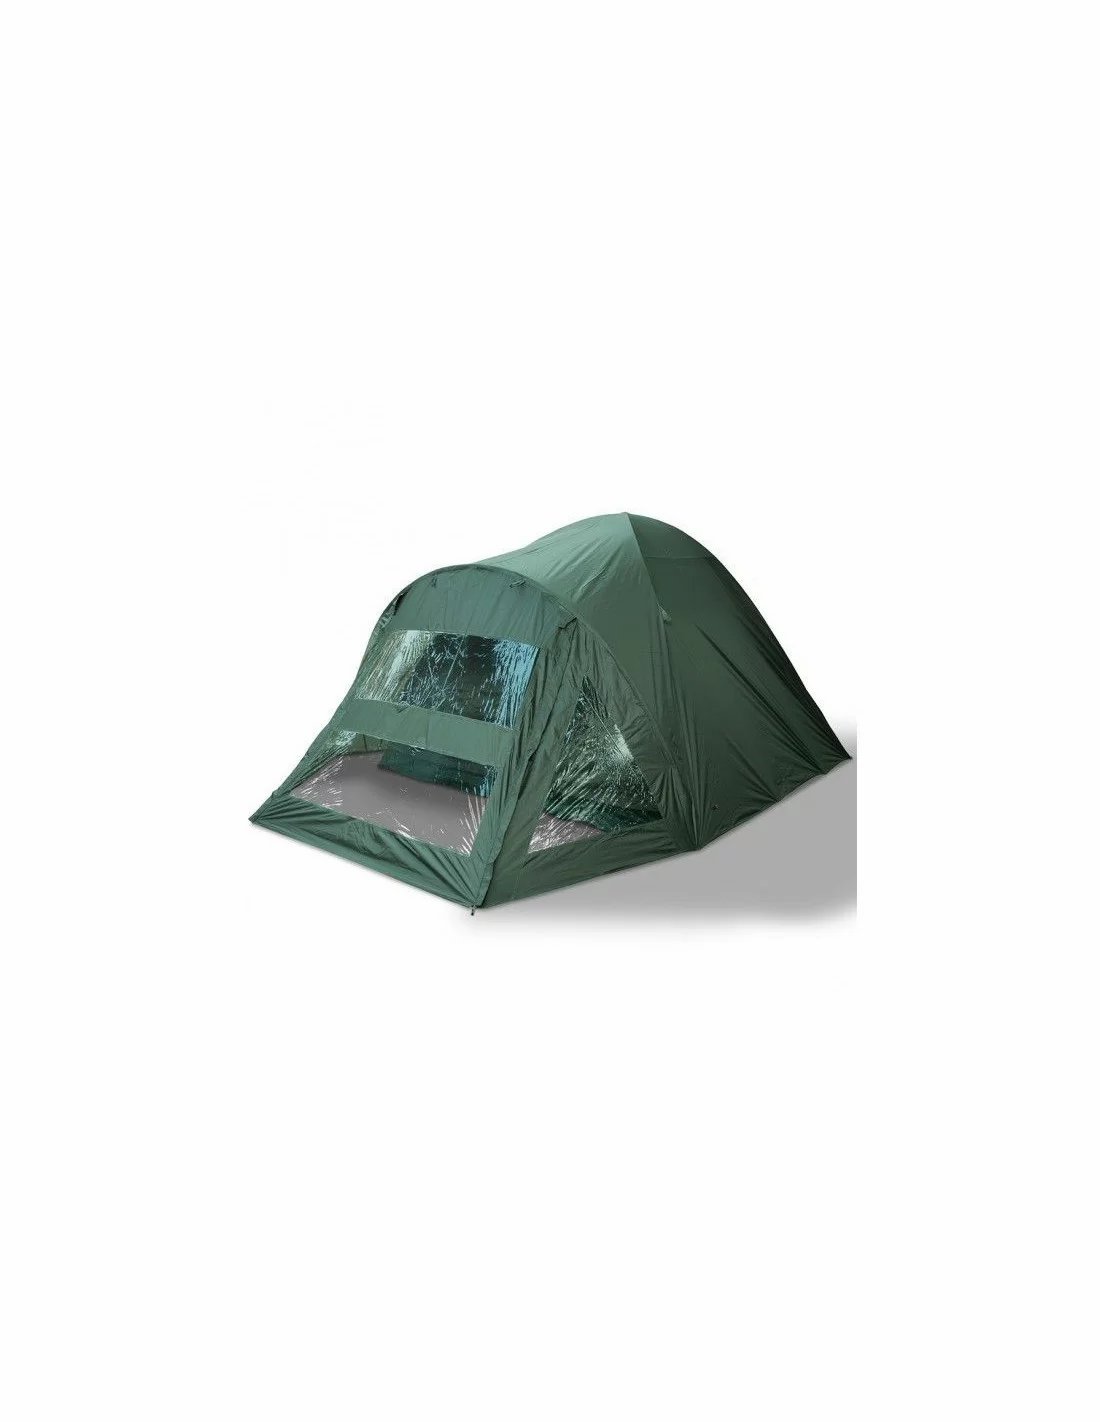 NGT 2 Man Double Skinned Bivvy палатка